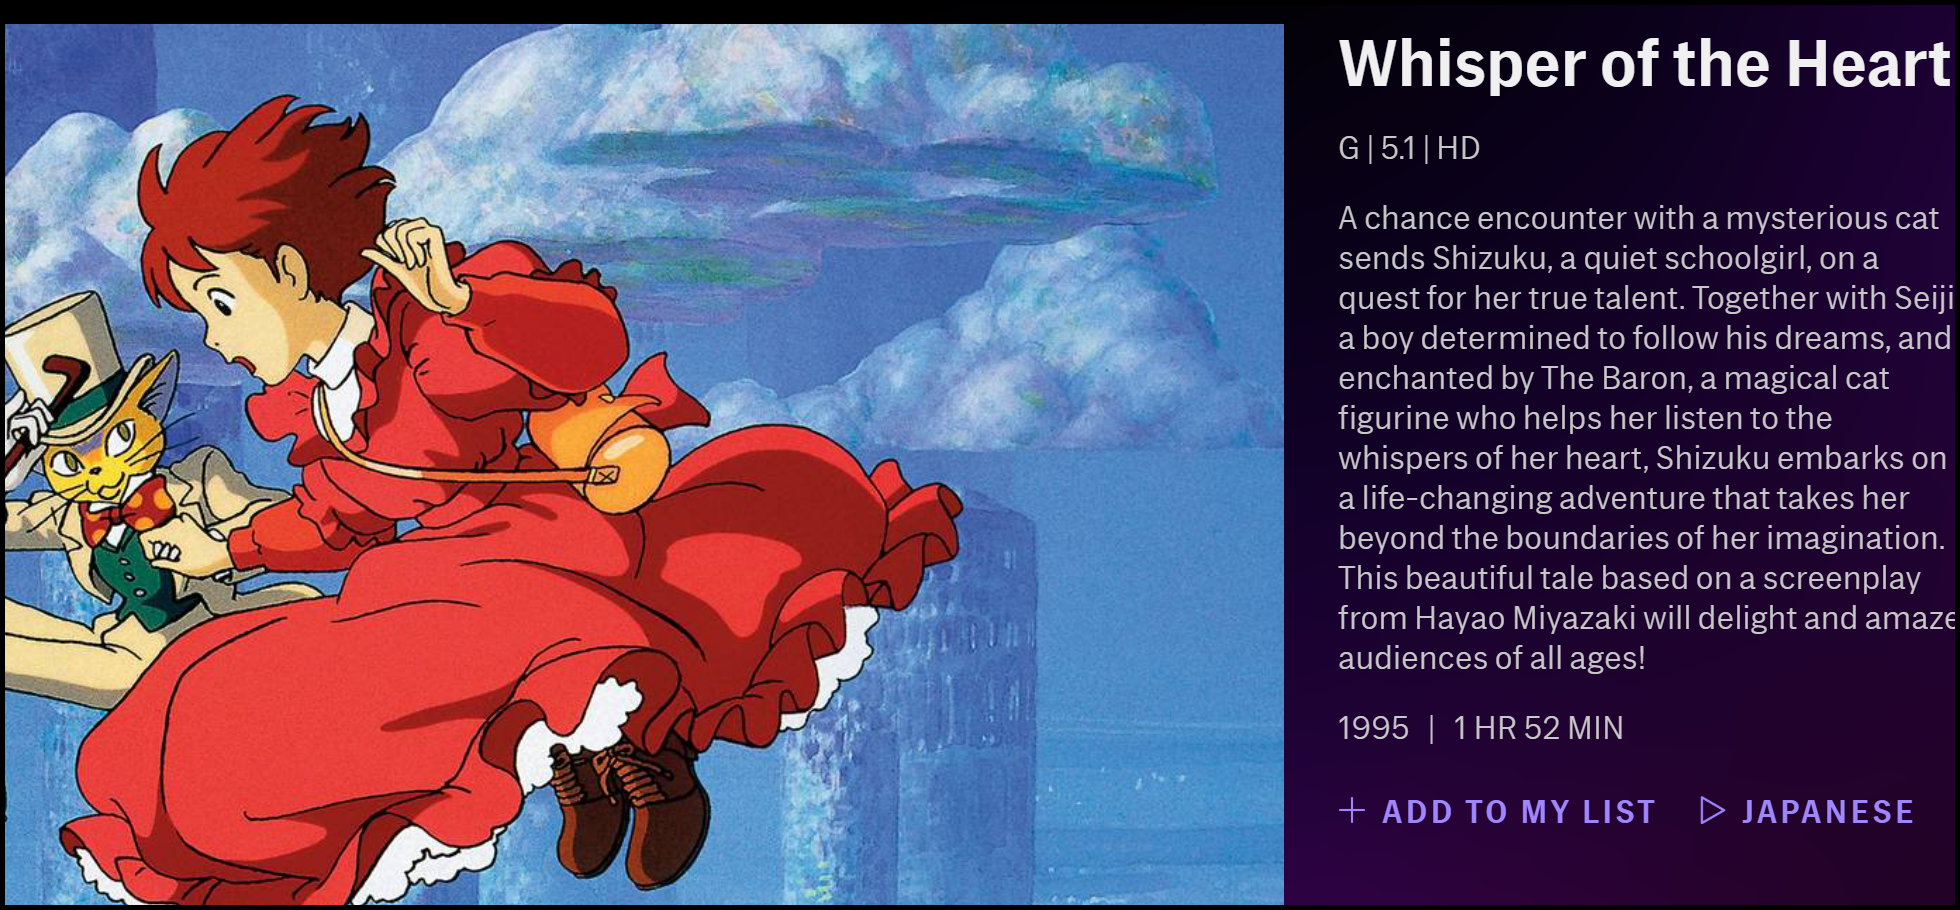 The description of Whisper of the Heart on HBO Max.